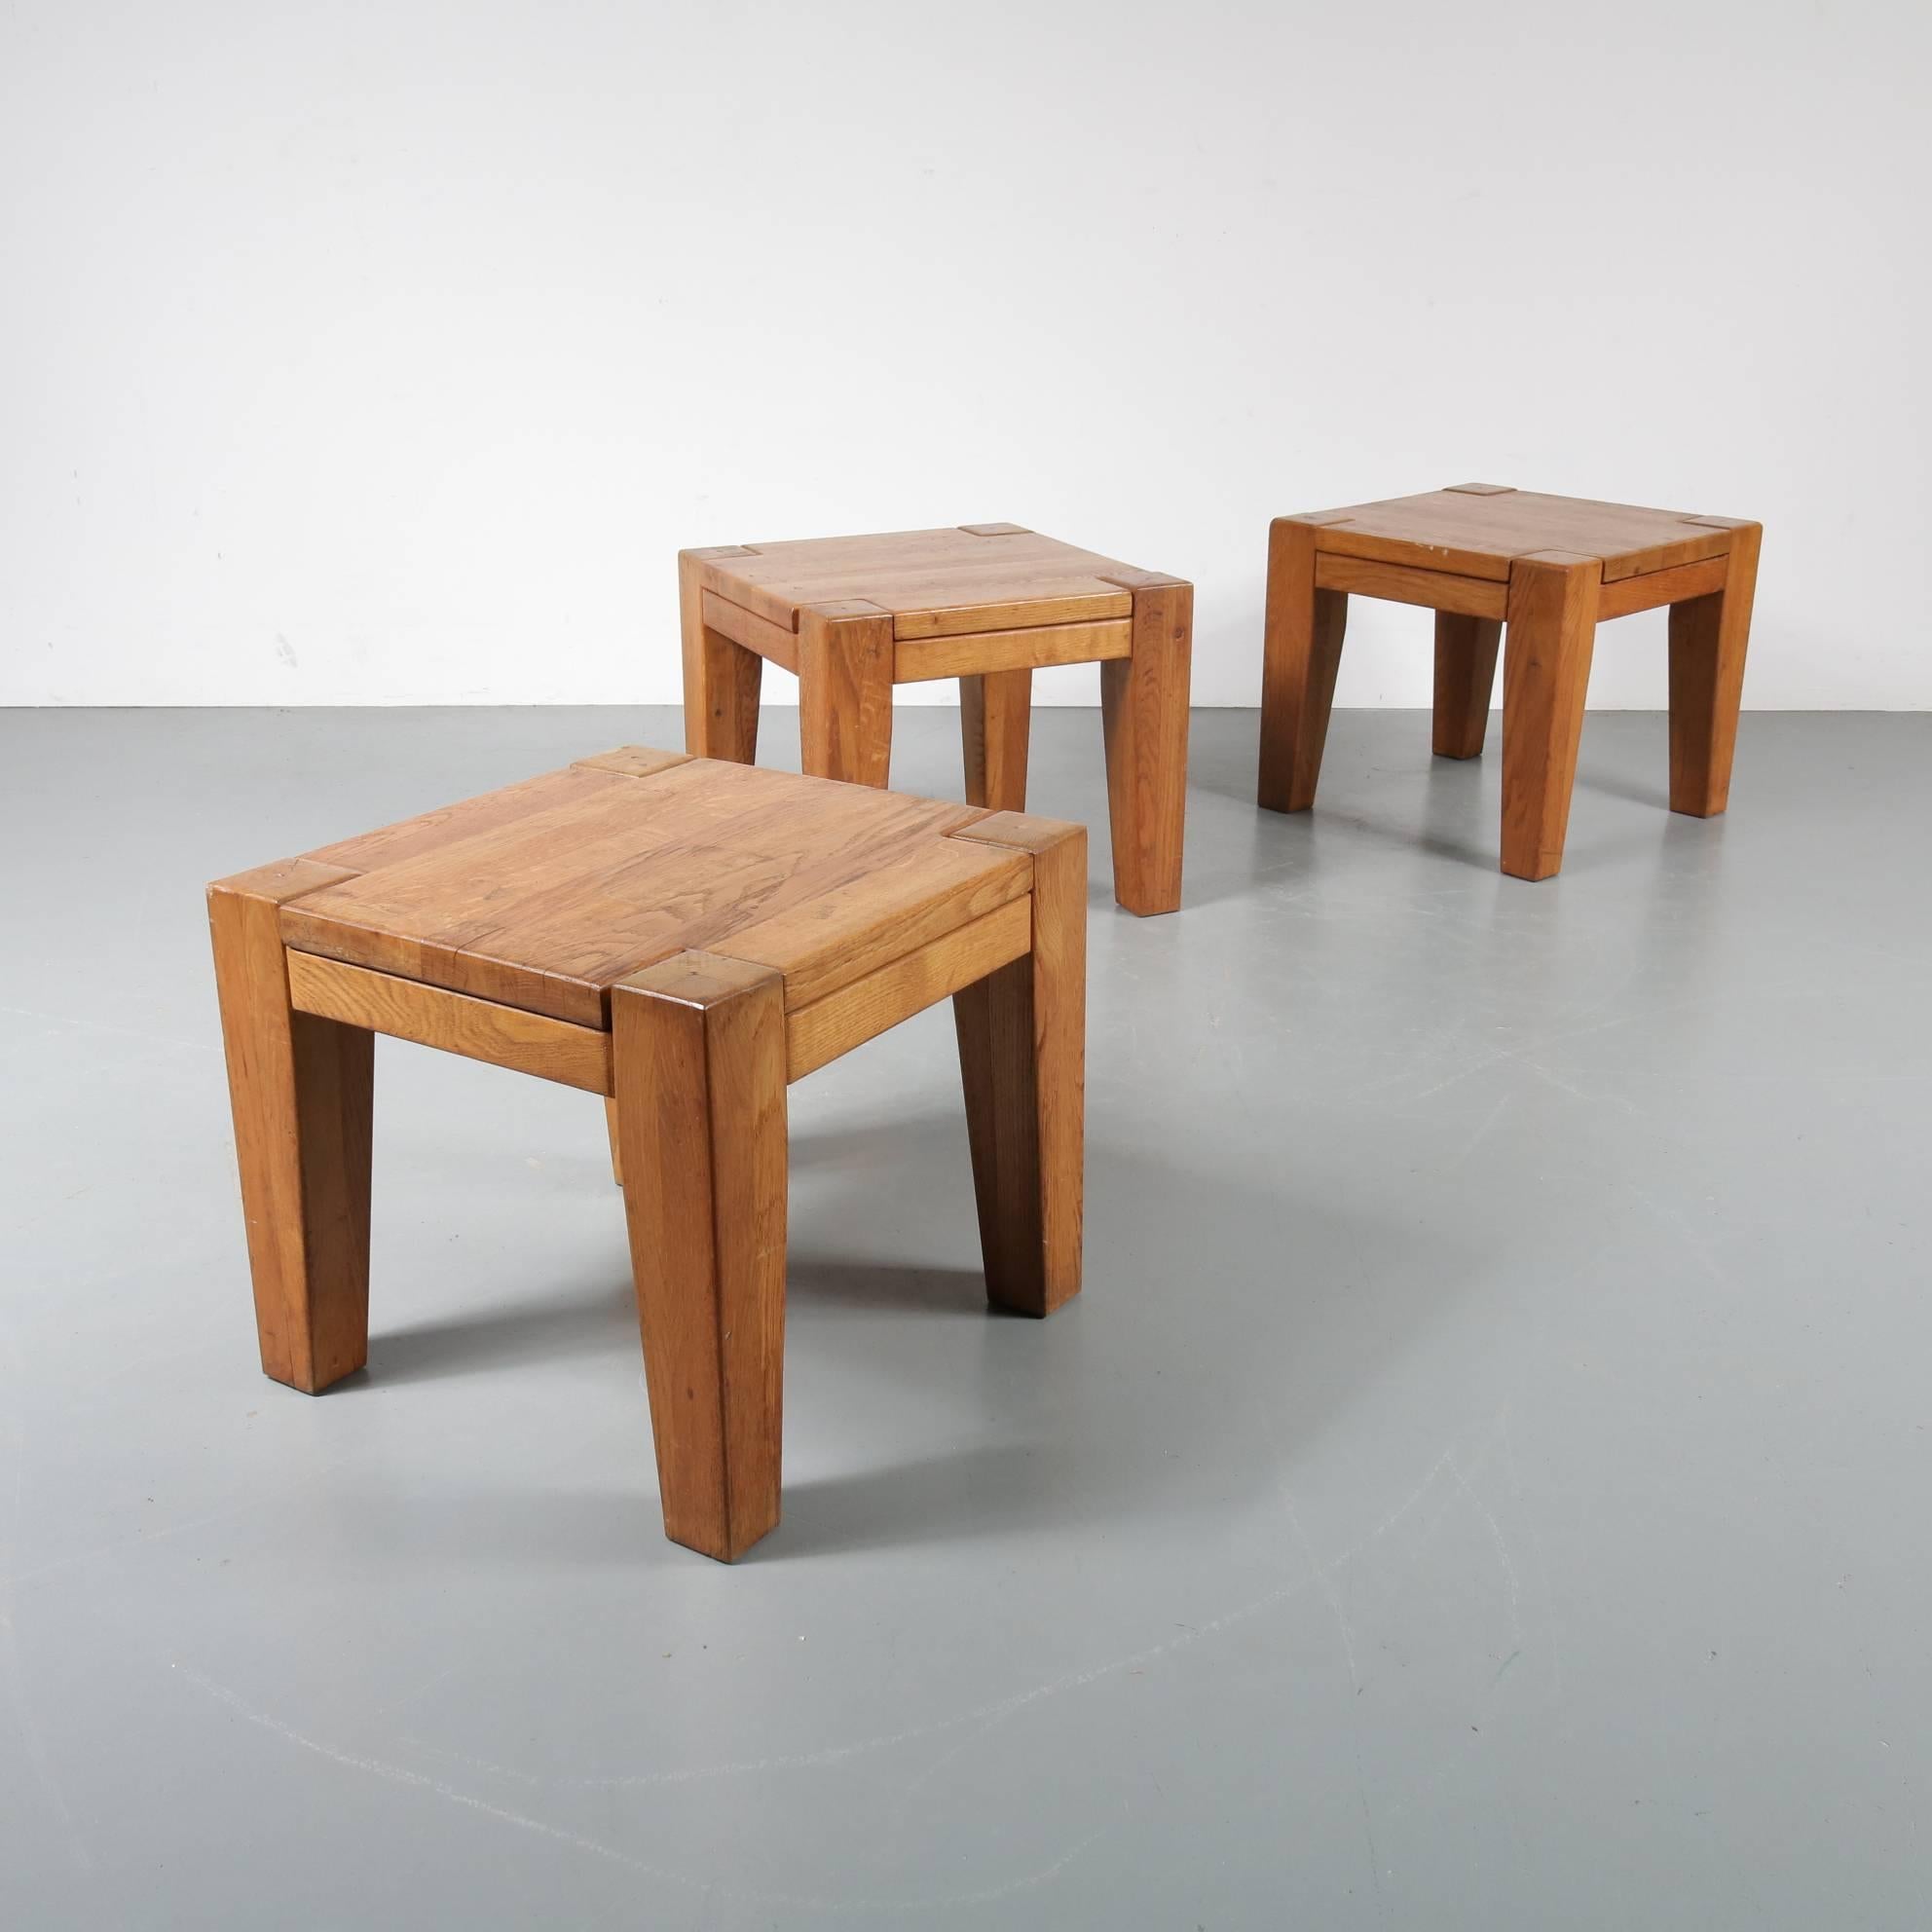 A beautiful set of three rustic stools or side tables, made in France, circa 1950.

These wonderful modern pieces are made of the highest quality solid oak wood. They have removable tops, adding versatility to their unique design. They would